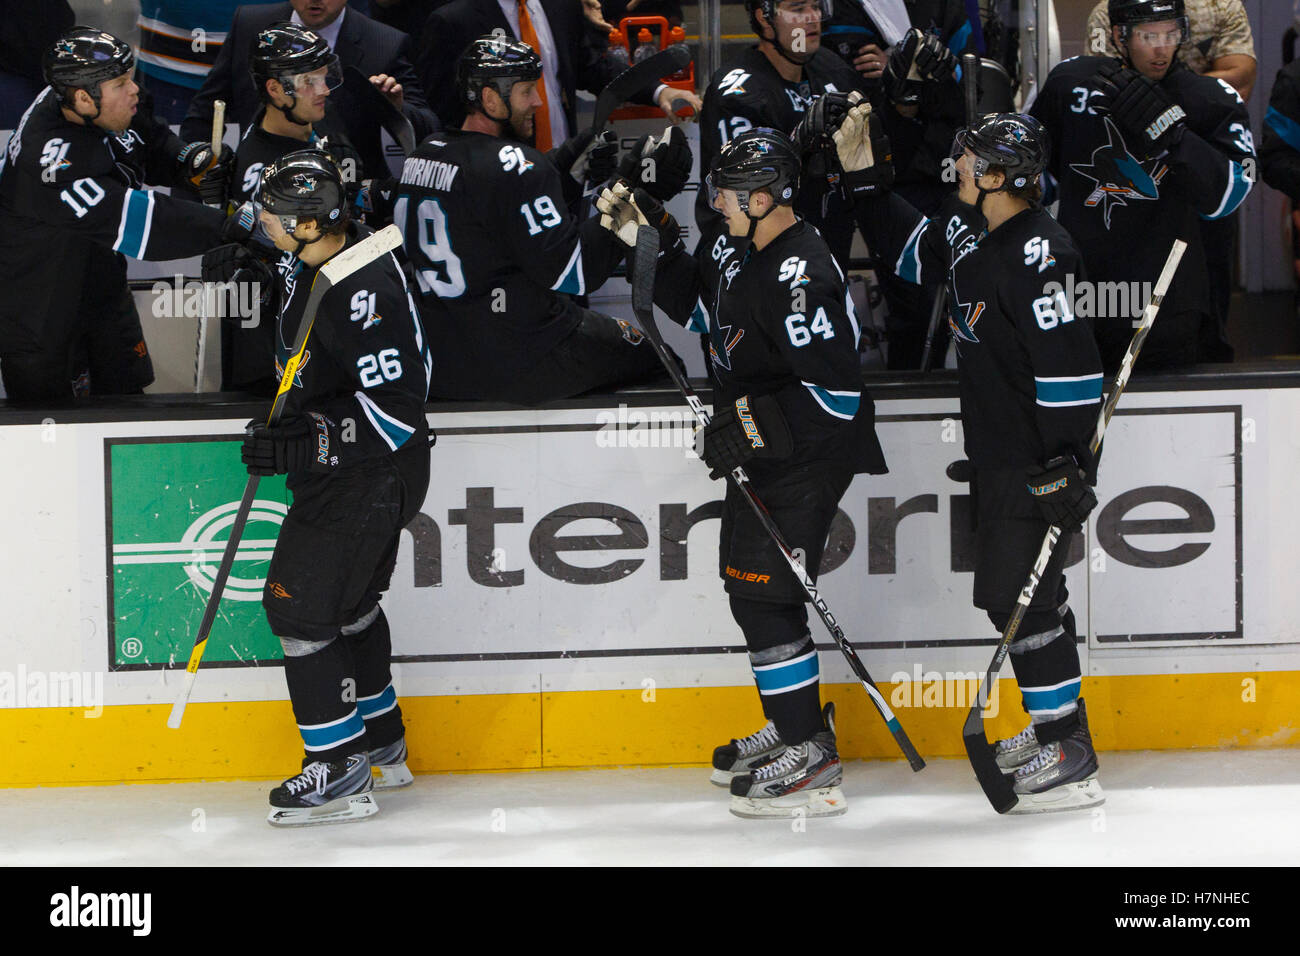 Feb 10, 2012; San Jose, CA, USA; San Jose Sharks left wing Jamie McGinn (64) is congratulated by teammates after scoring a goal against the Chicago Blackhawks during the third period at HP Pavilion. San Jose defeated Chicago 5-3. Stock Photo